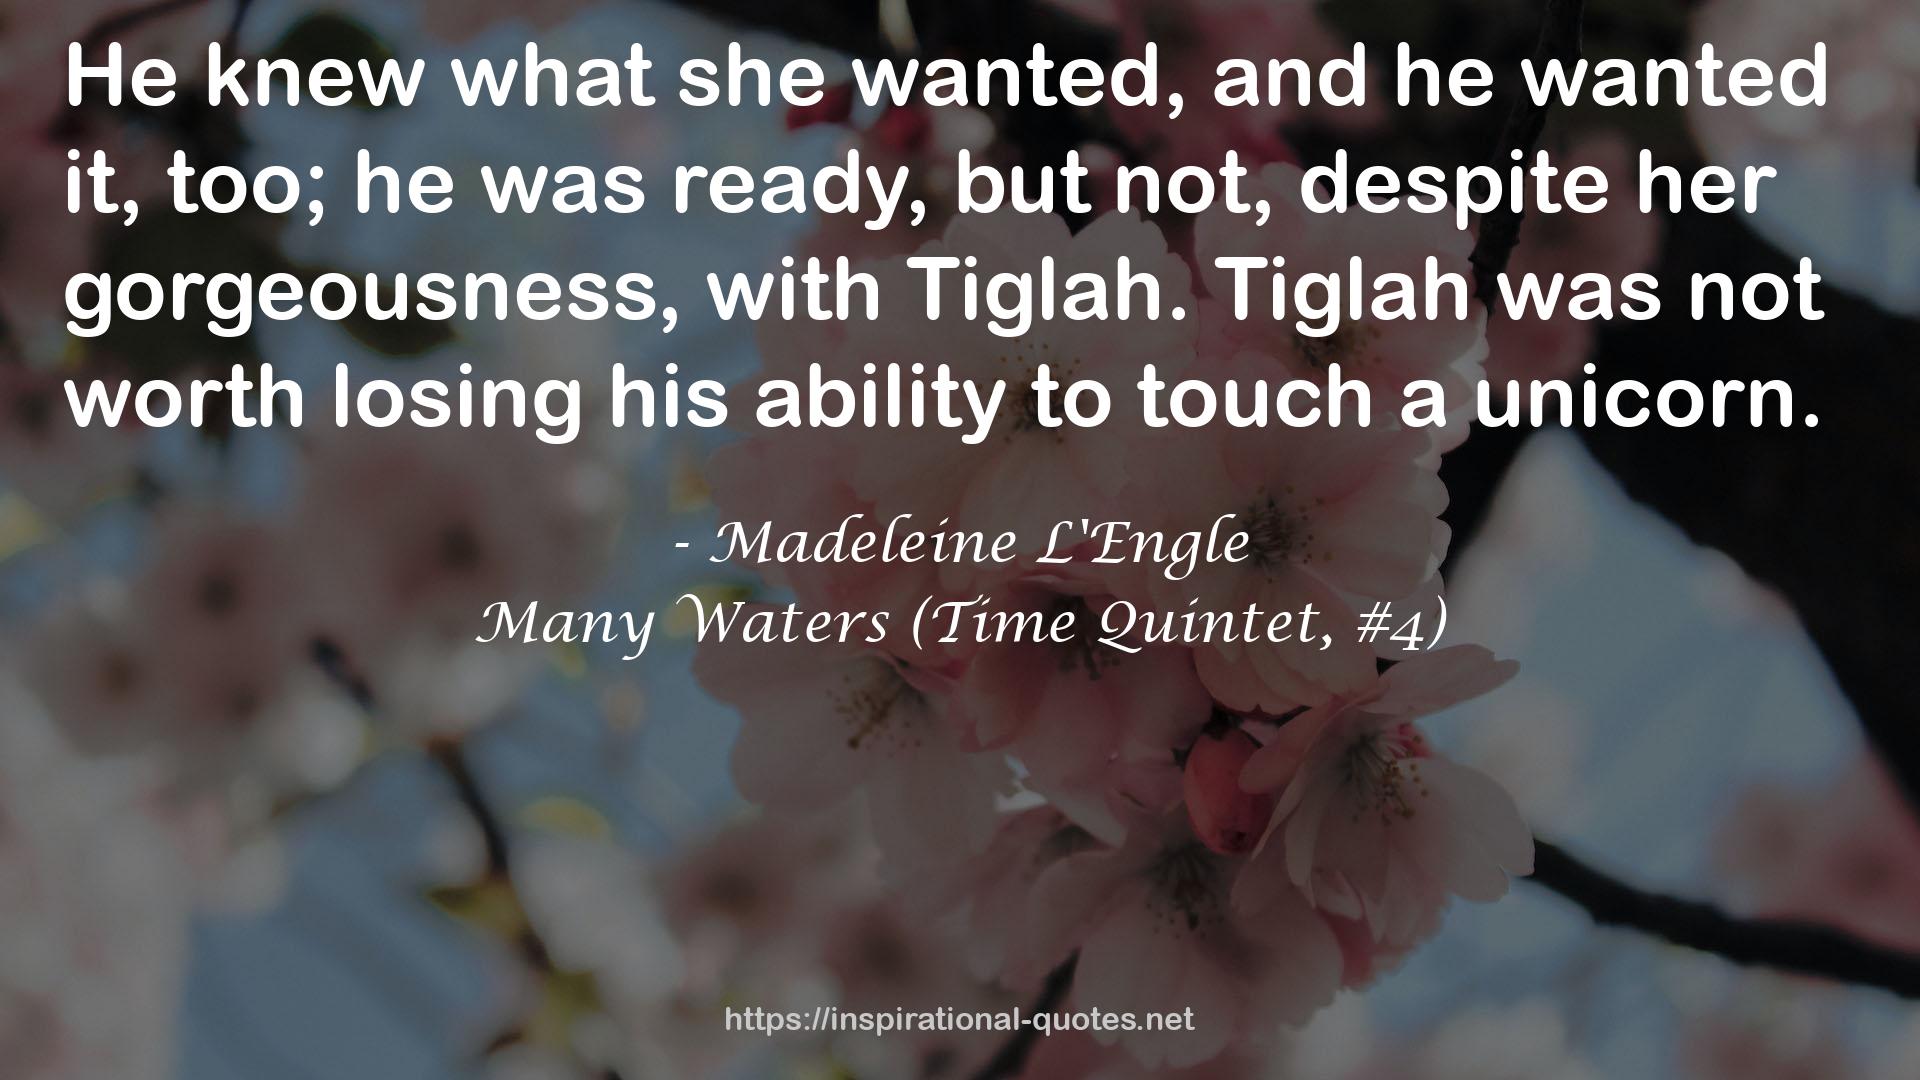 Many Waters (Time Quintet, #4) QUOTES